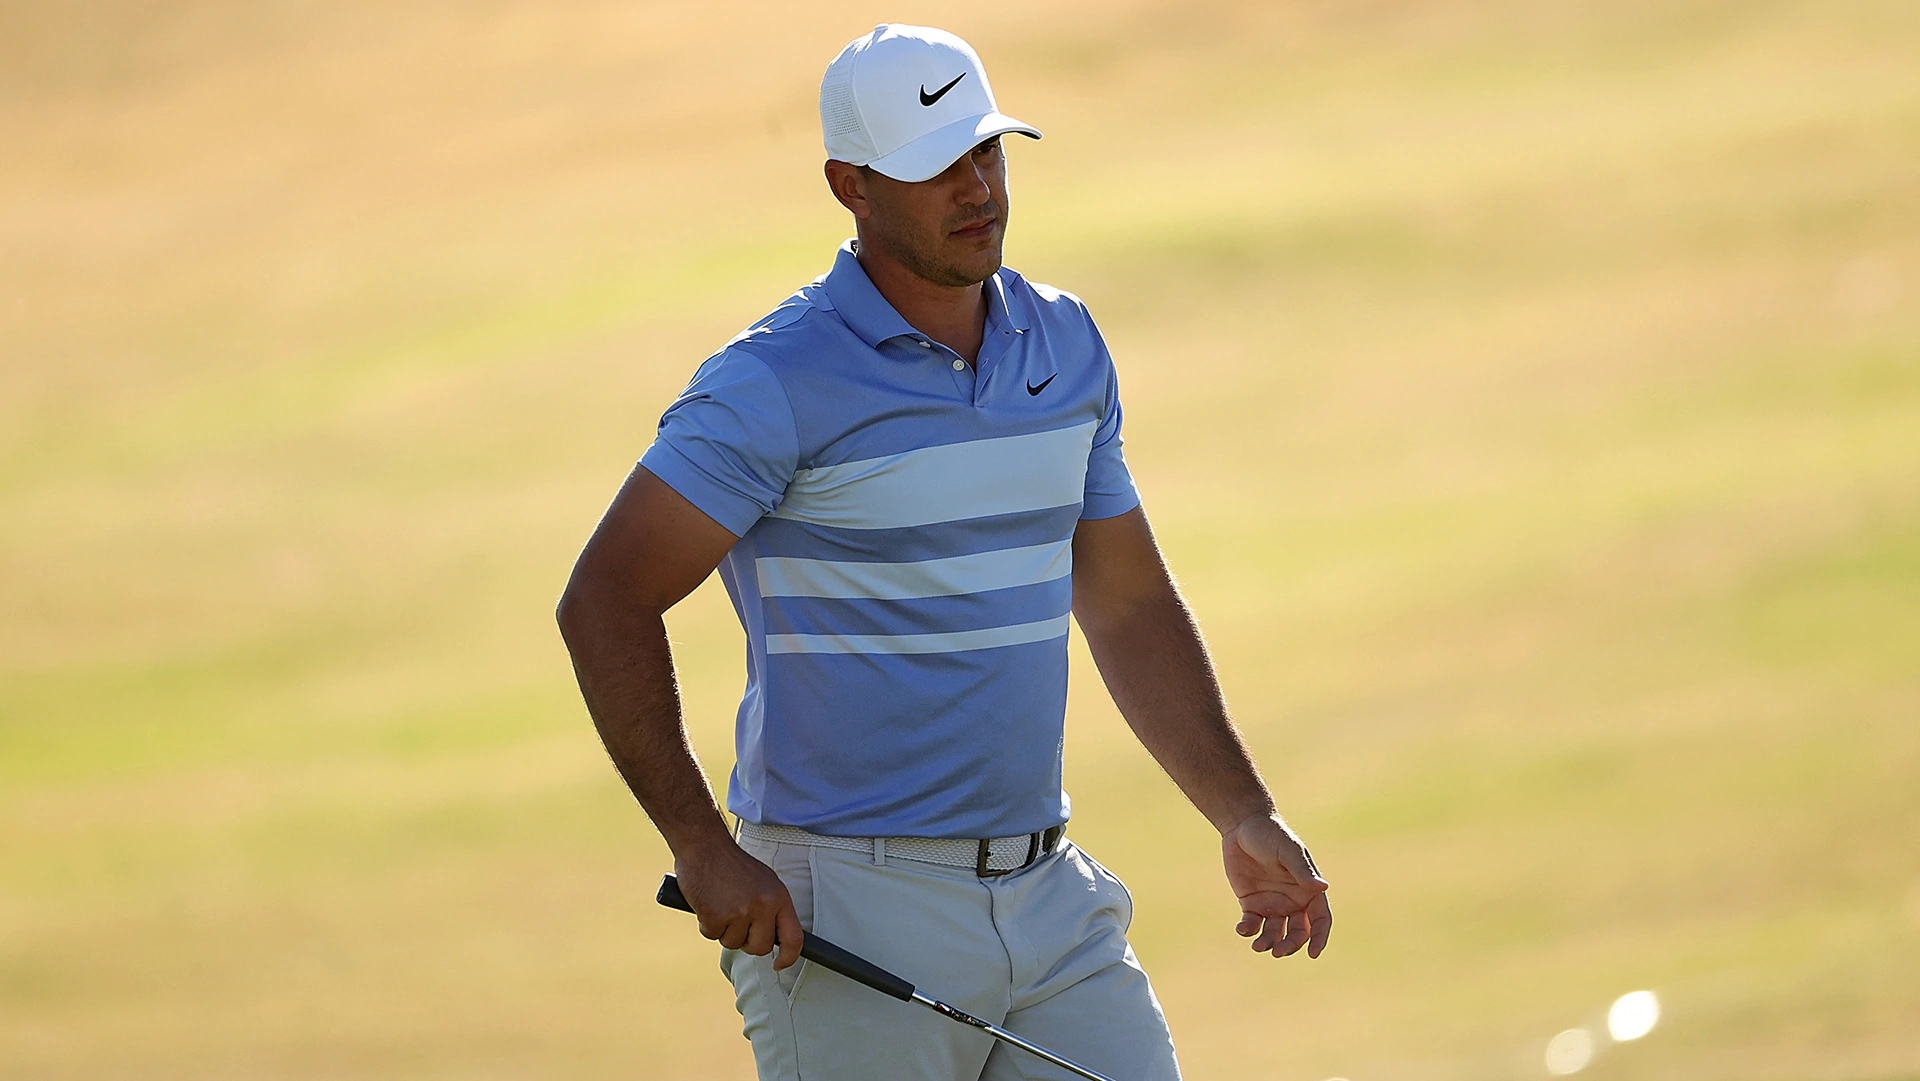 Watch: The clutch chip-in that won Brooks Koepka the Phoenix Open